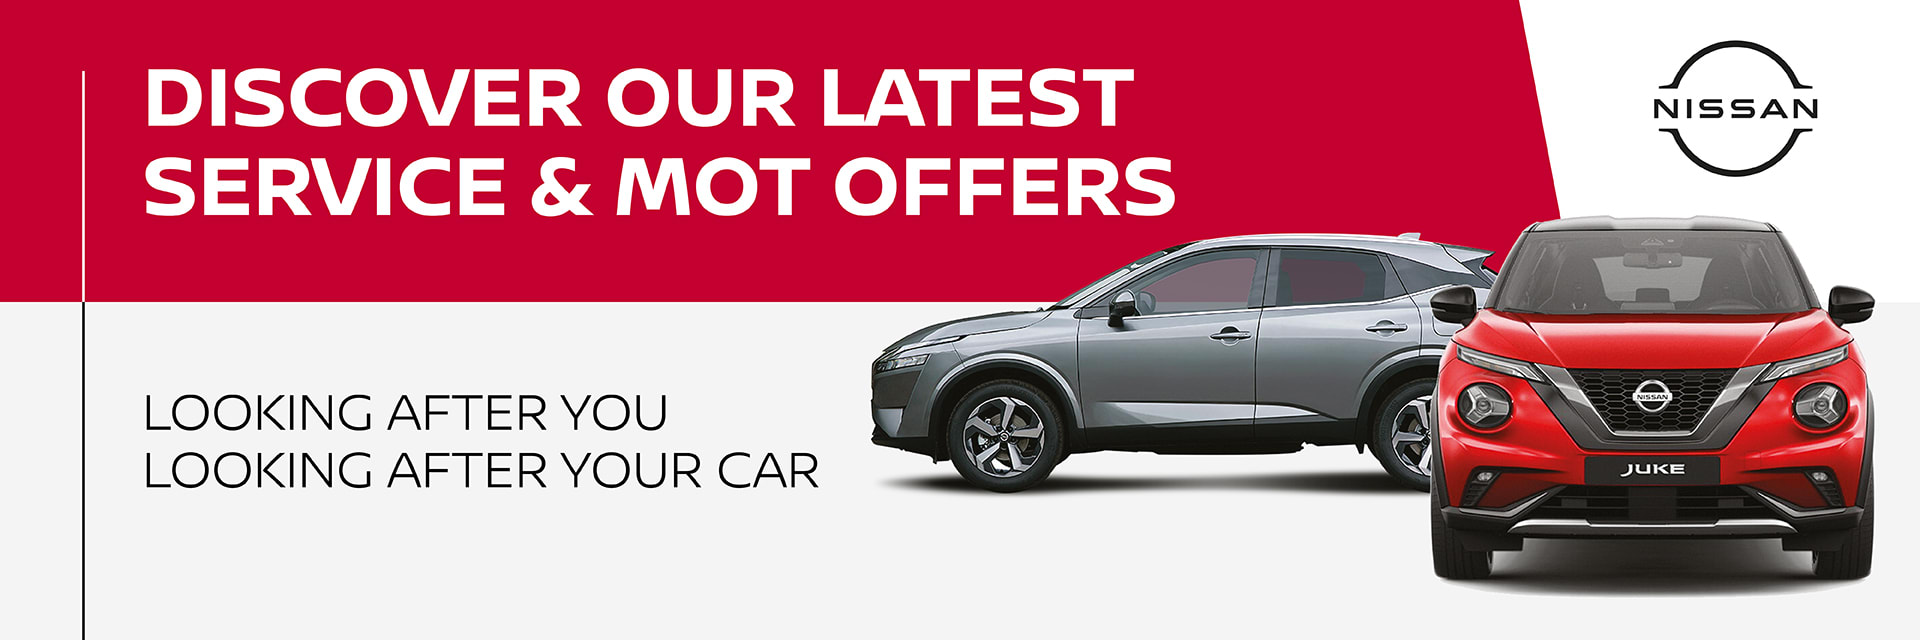 Latest Nissan Service Offers